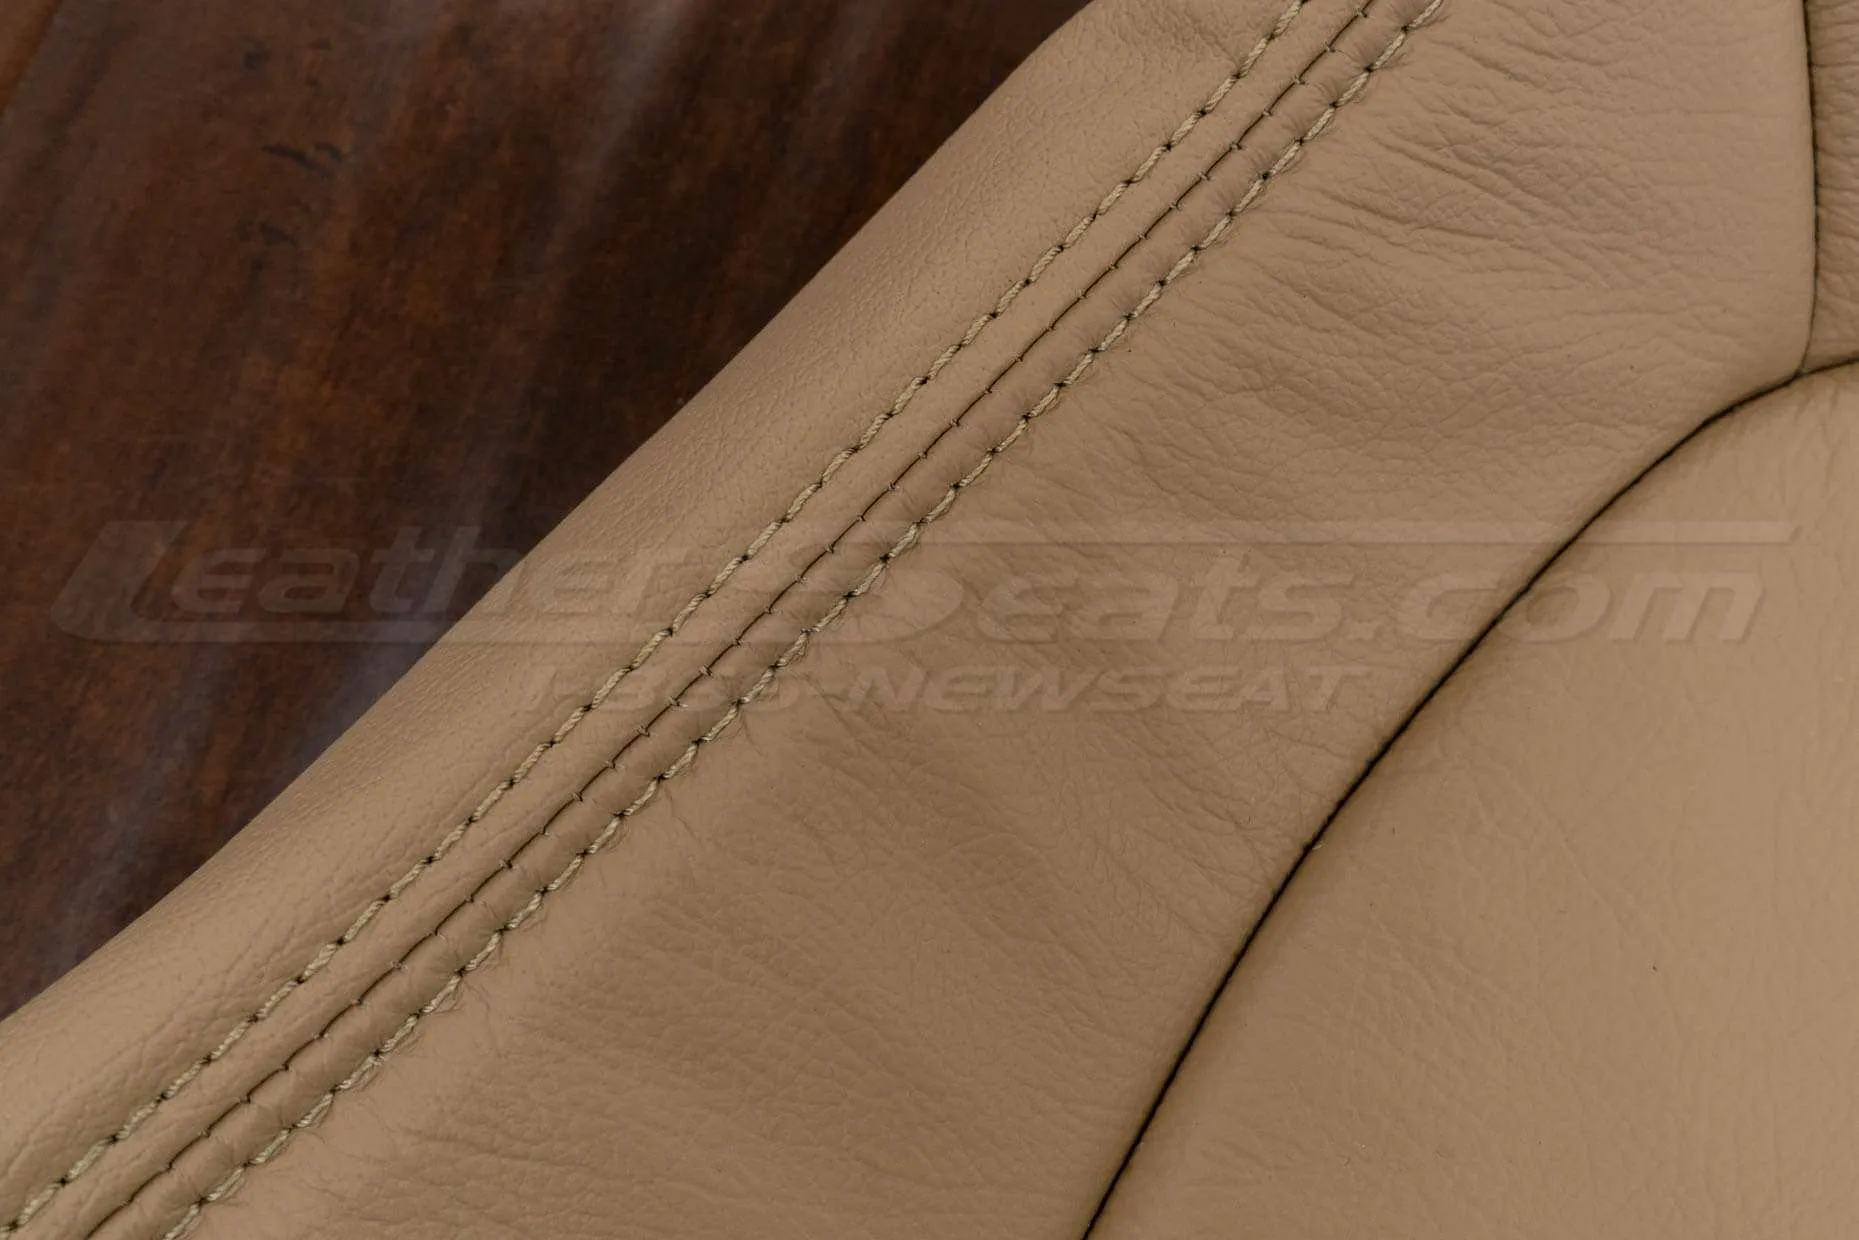 Bisque double-stitching